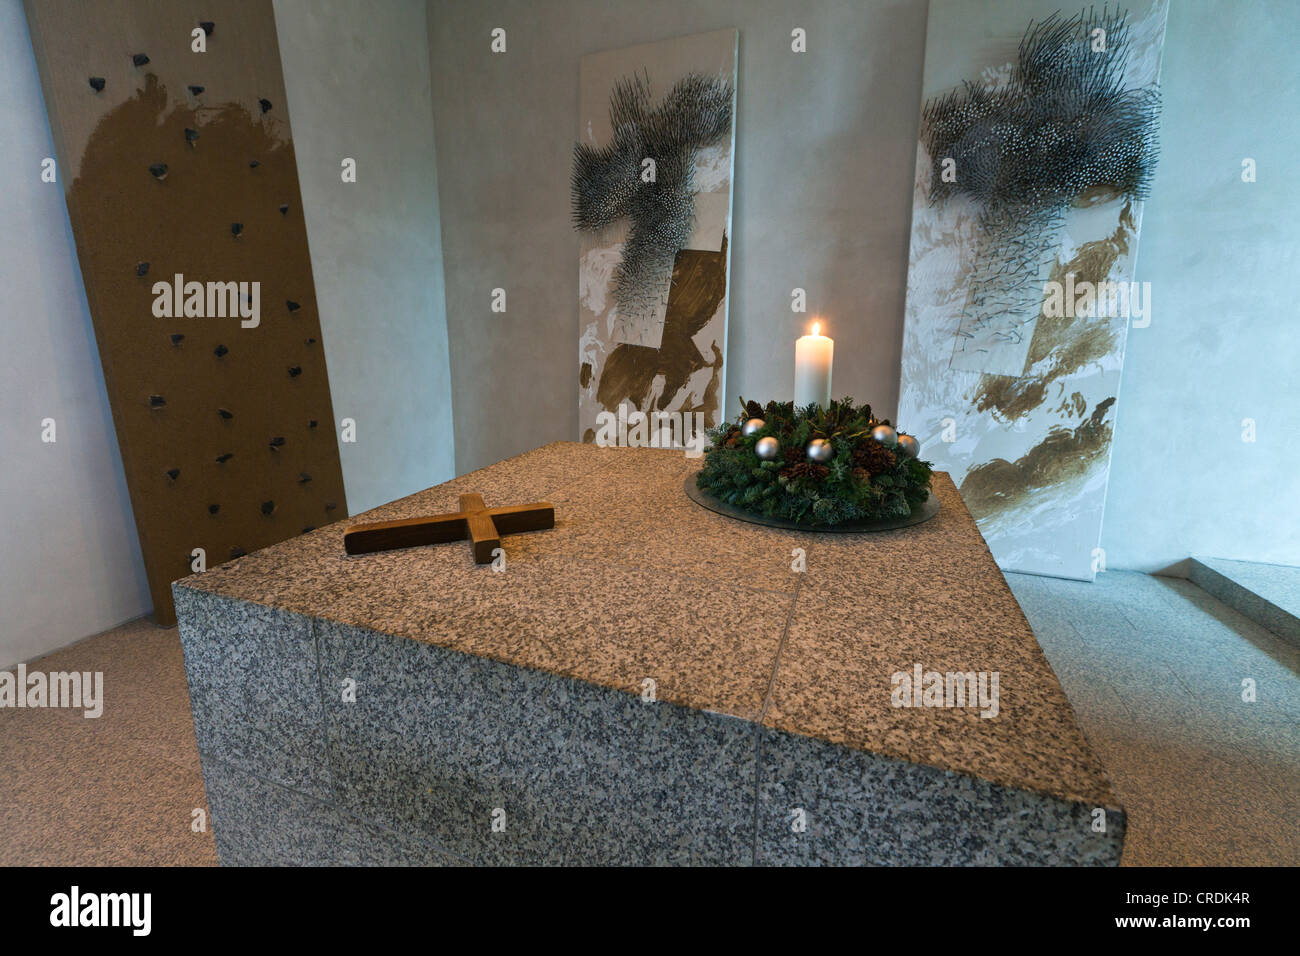 Inter-denominational prayer room in the German Parliament in the weeks before Christmas, Berlin, Germany, Europe Stock Photo